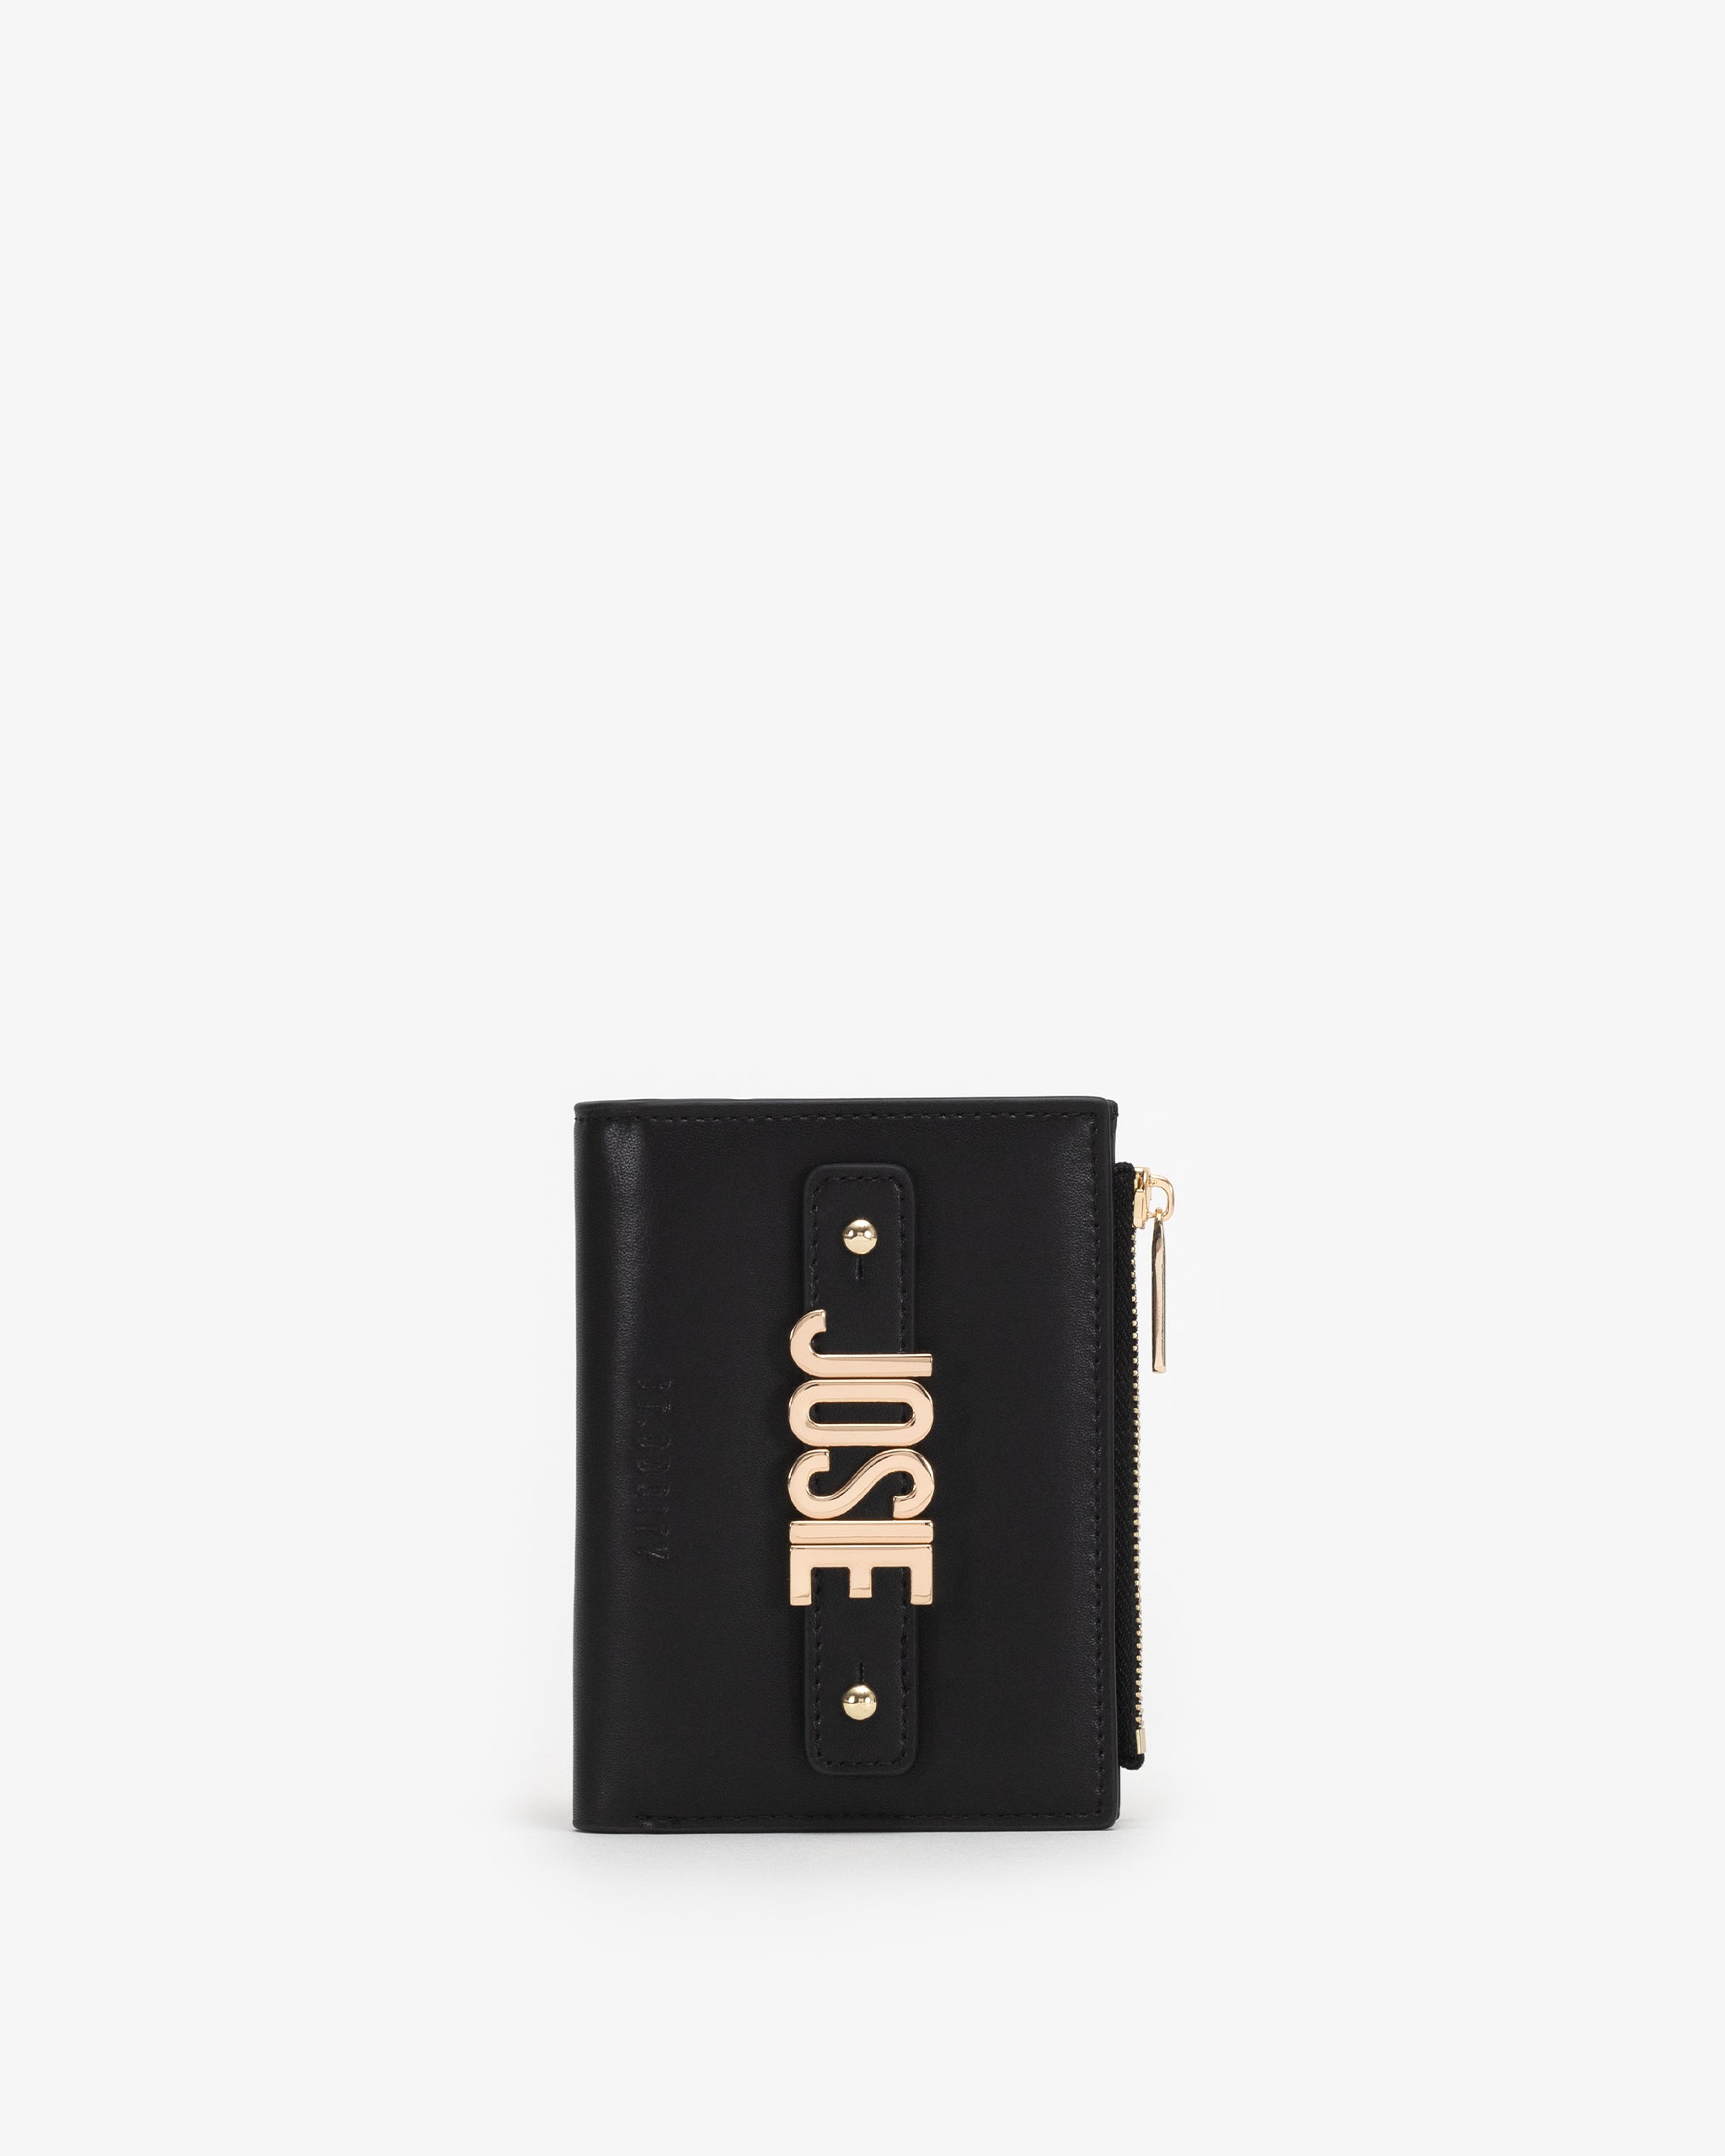 Wallet in Black/Gold with Personalised Hardware